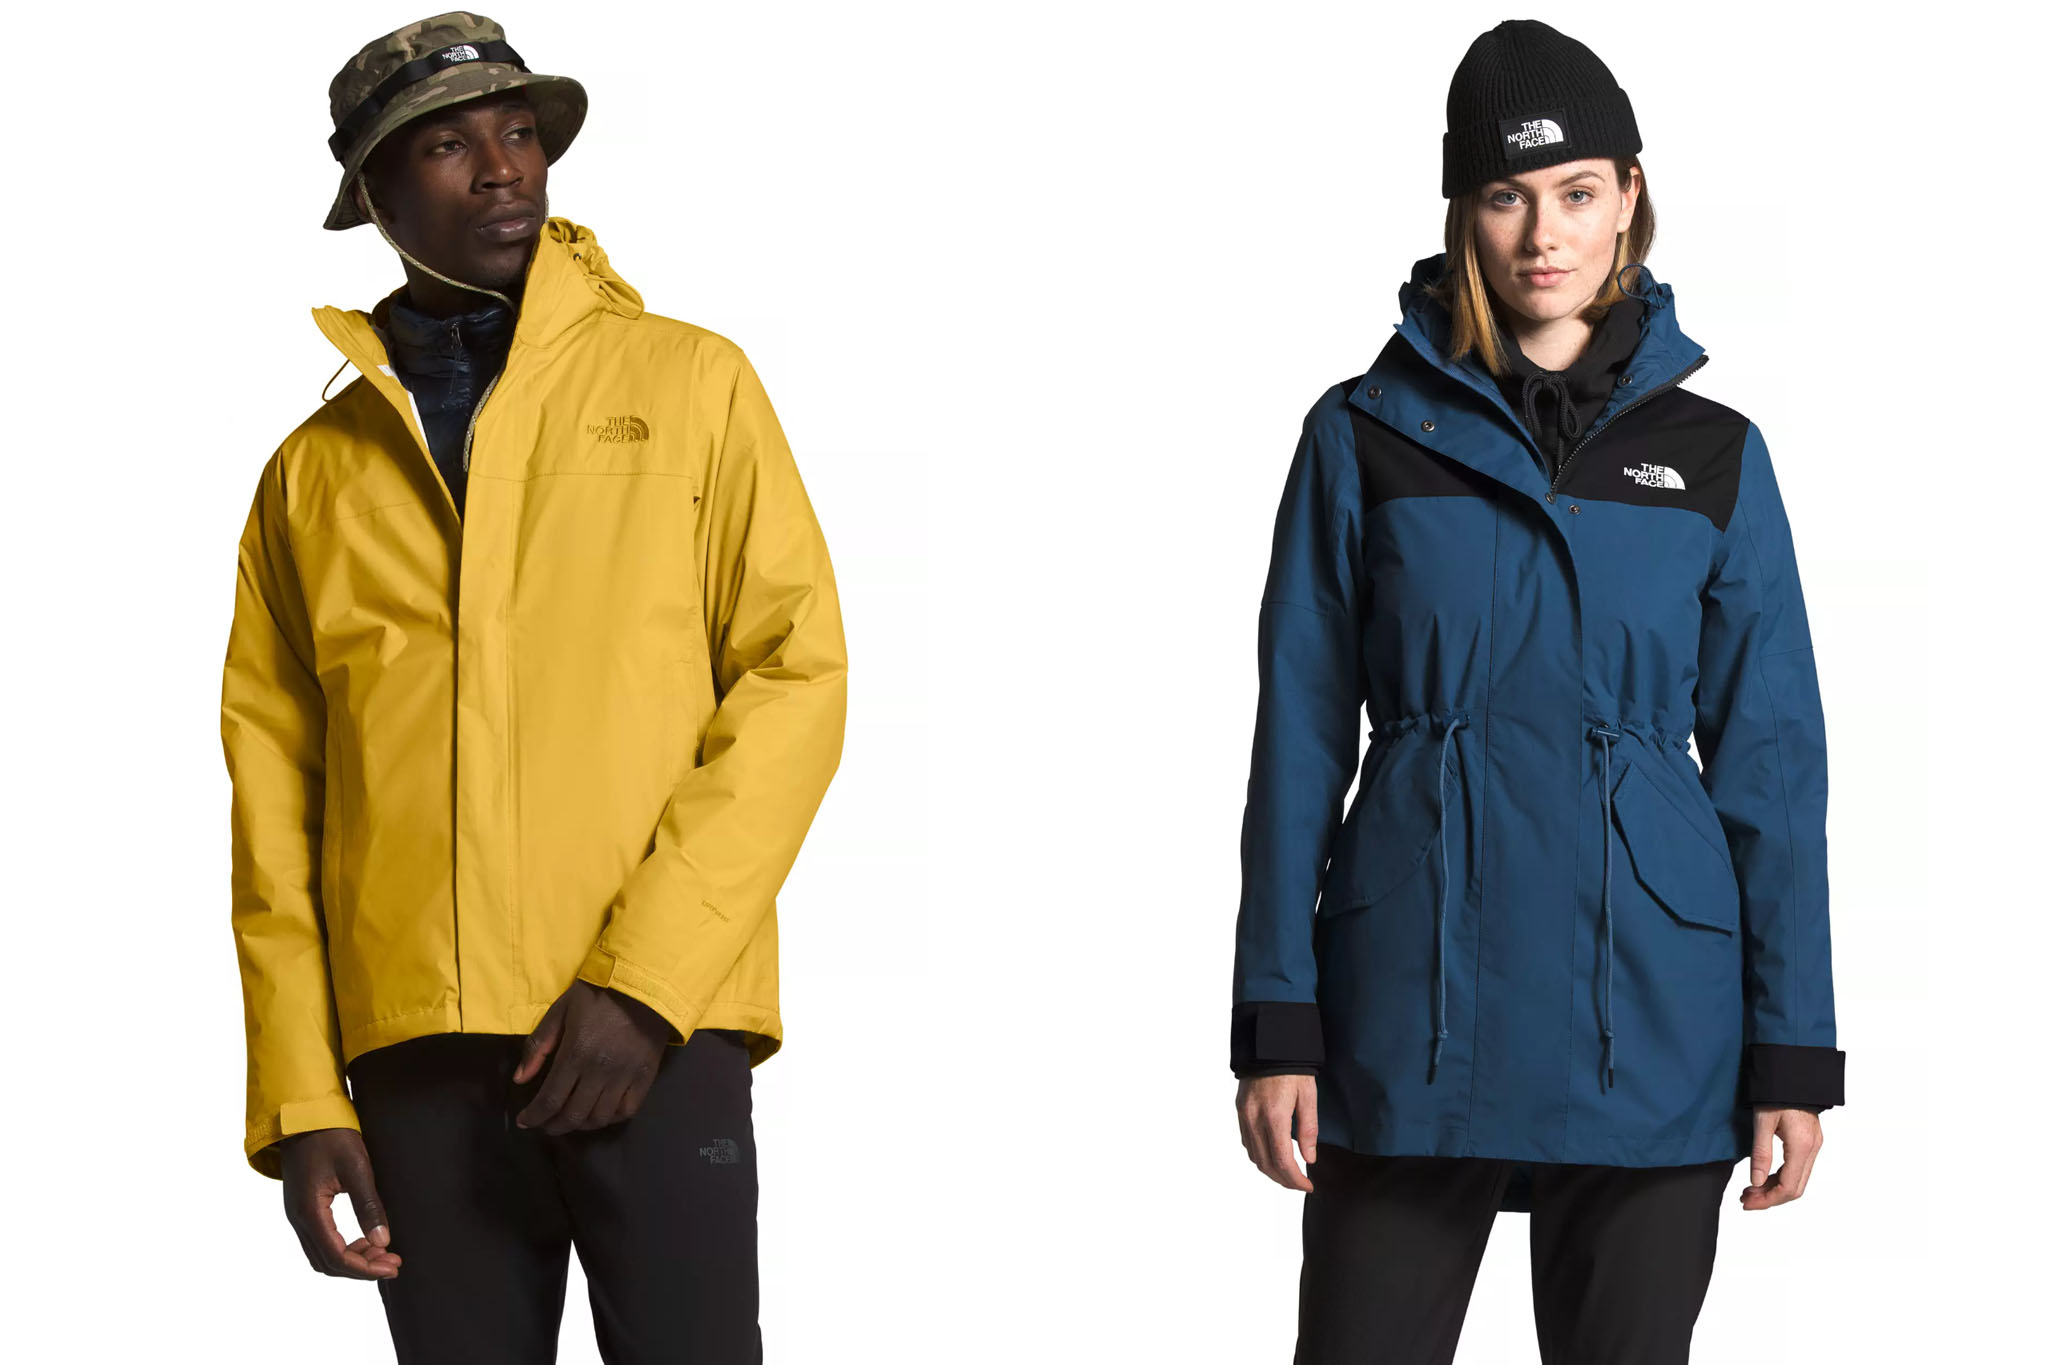 The North Face is offering a 50 discount to healthcare workers and